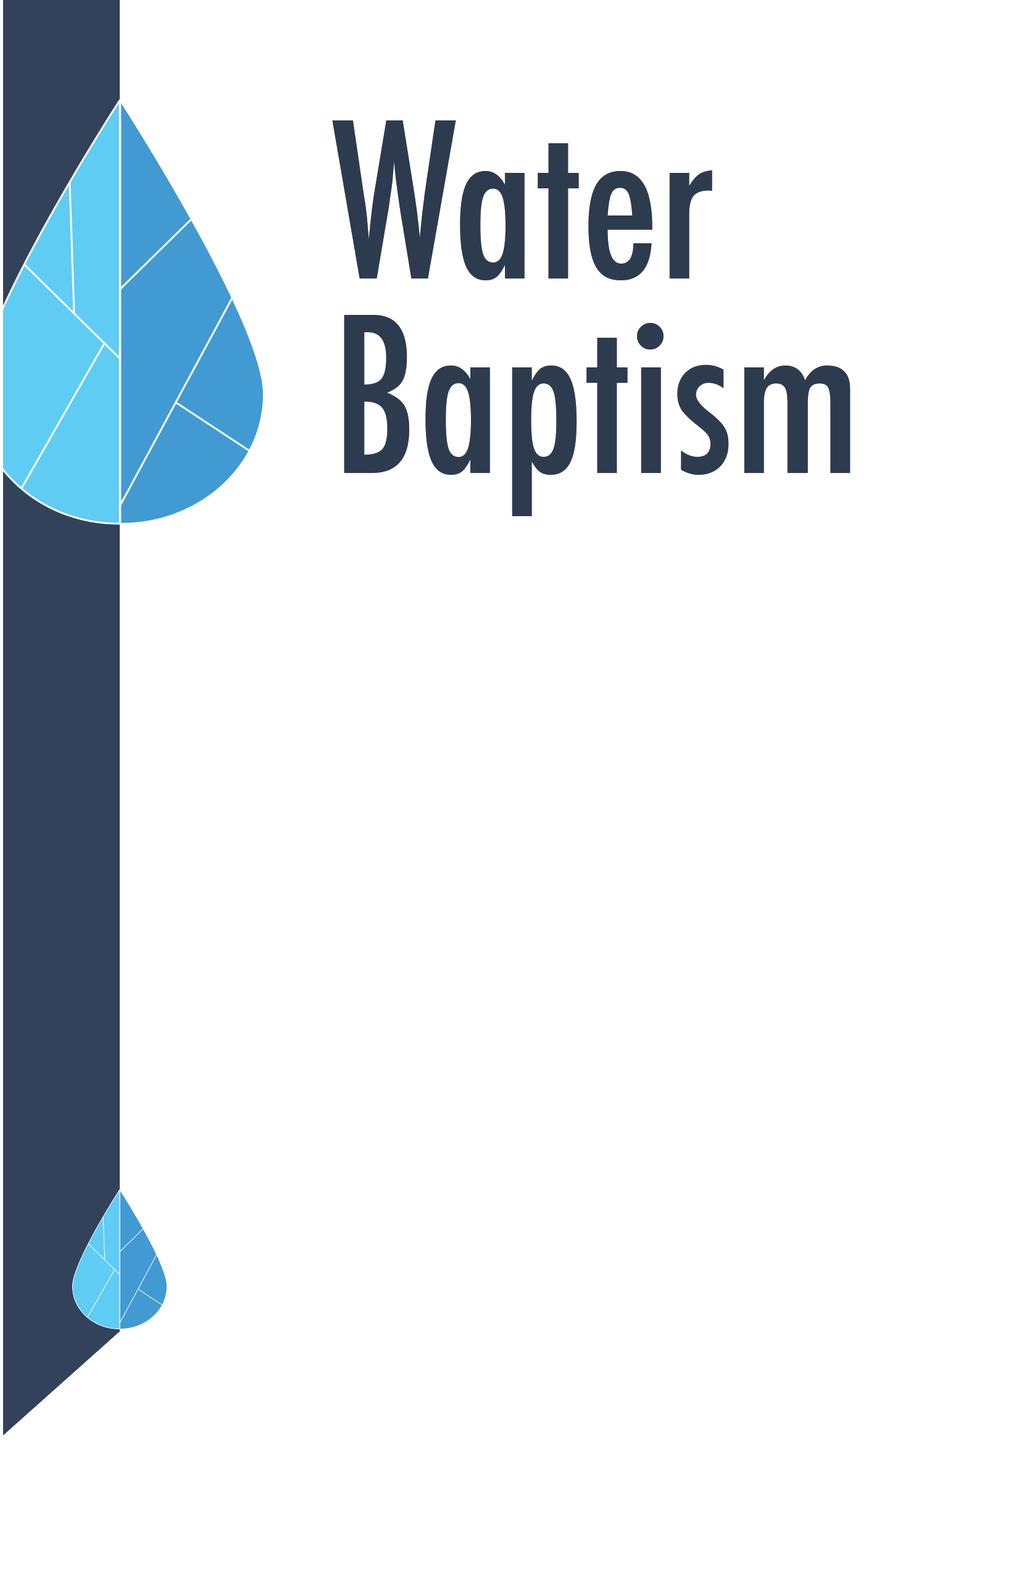 If you re reading this, there s a good chance you re interested in getting baptized; or, at the very least, you re curious about baptism. If so, you re on the right track.